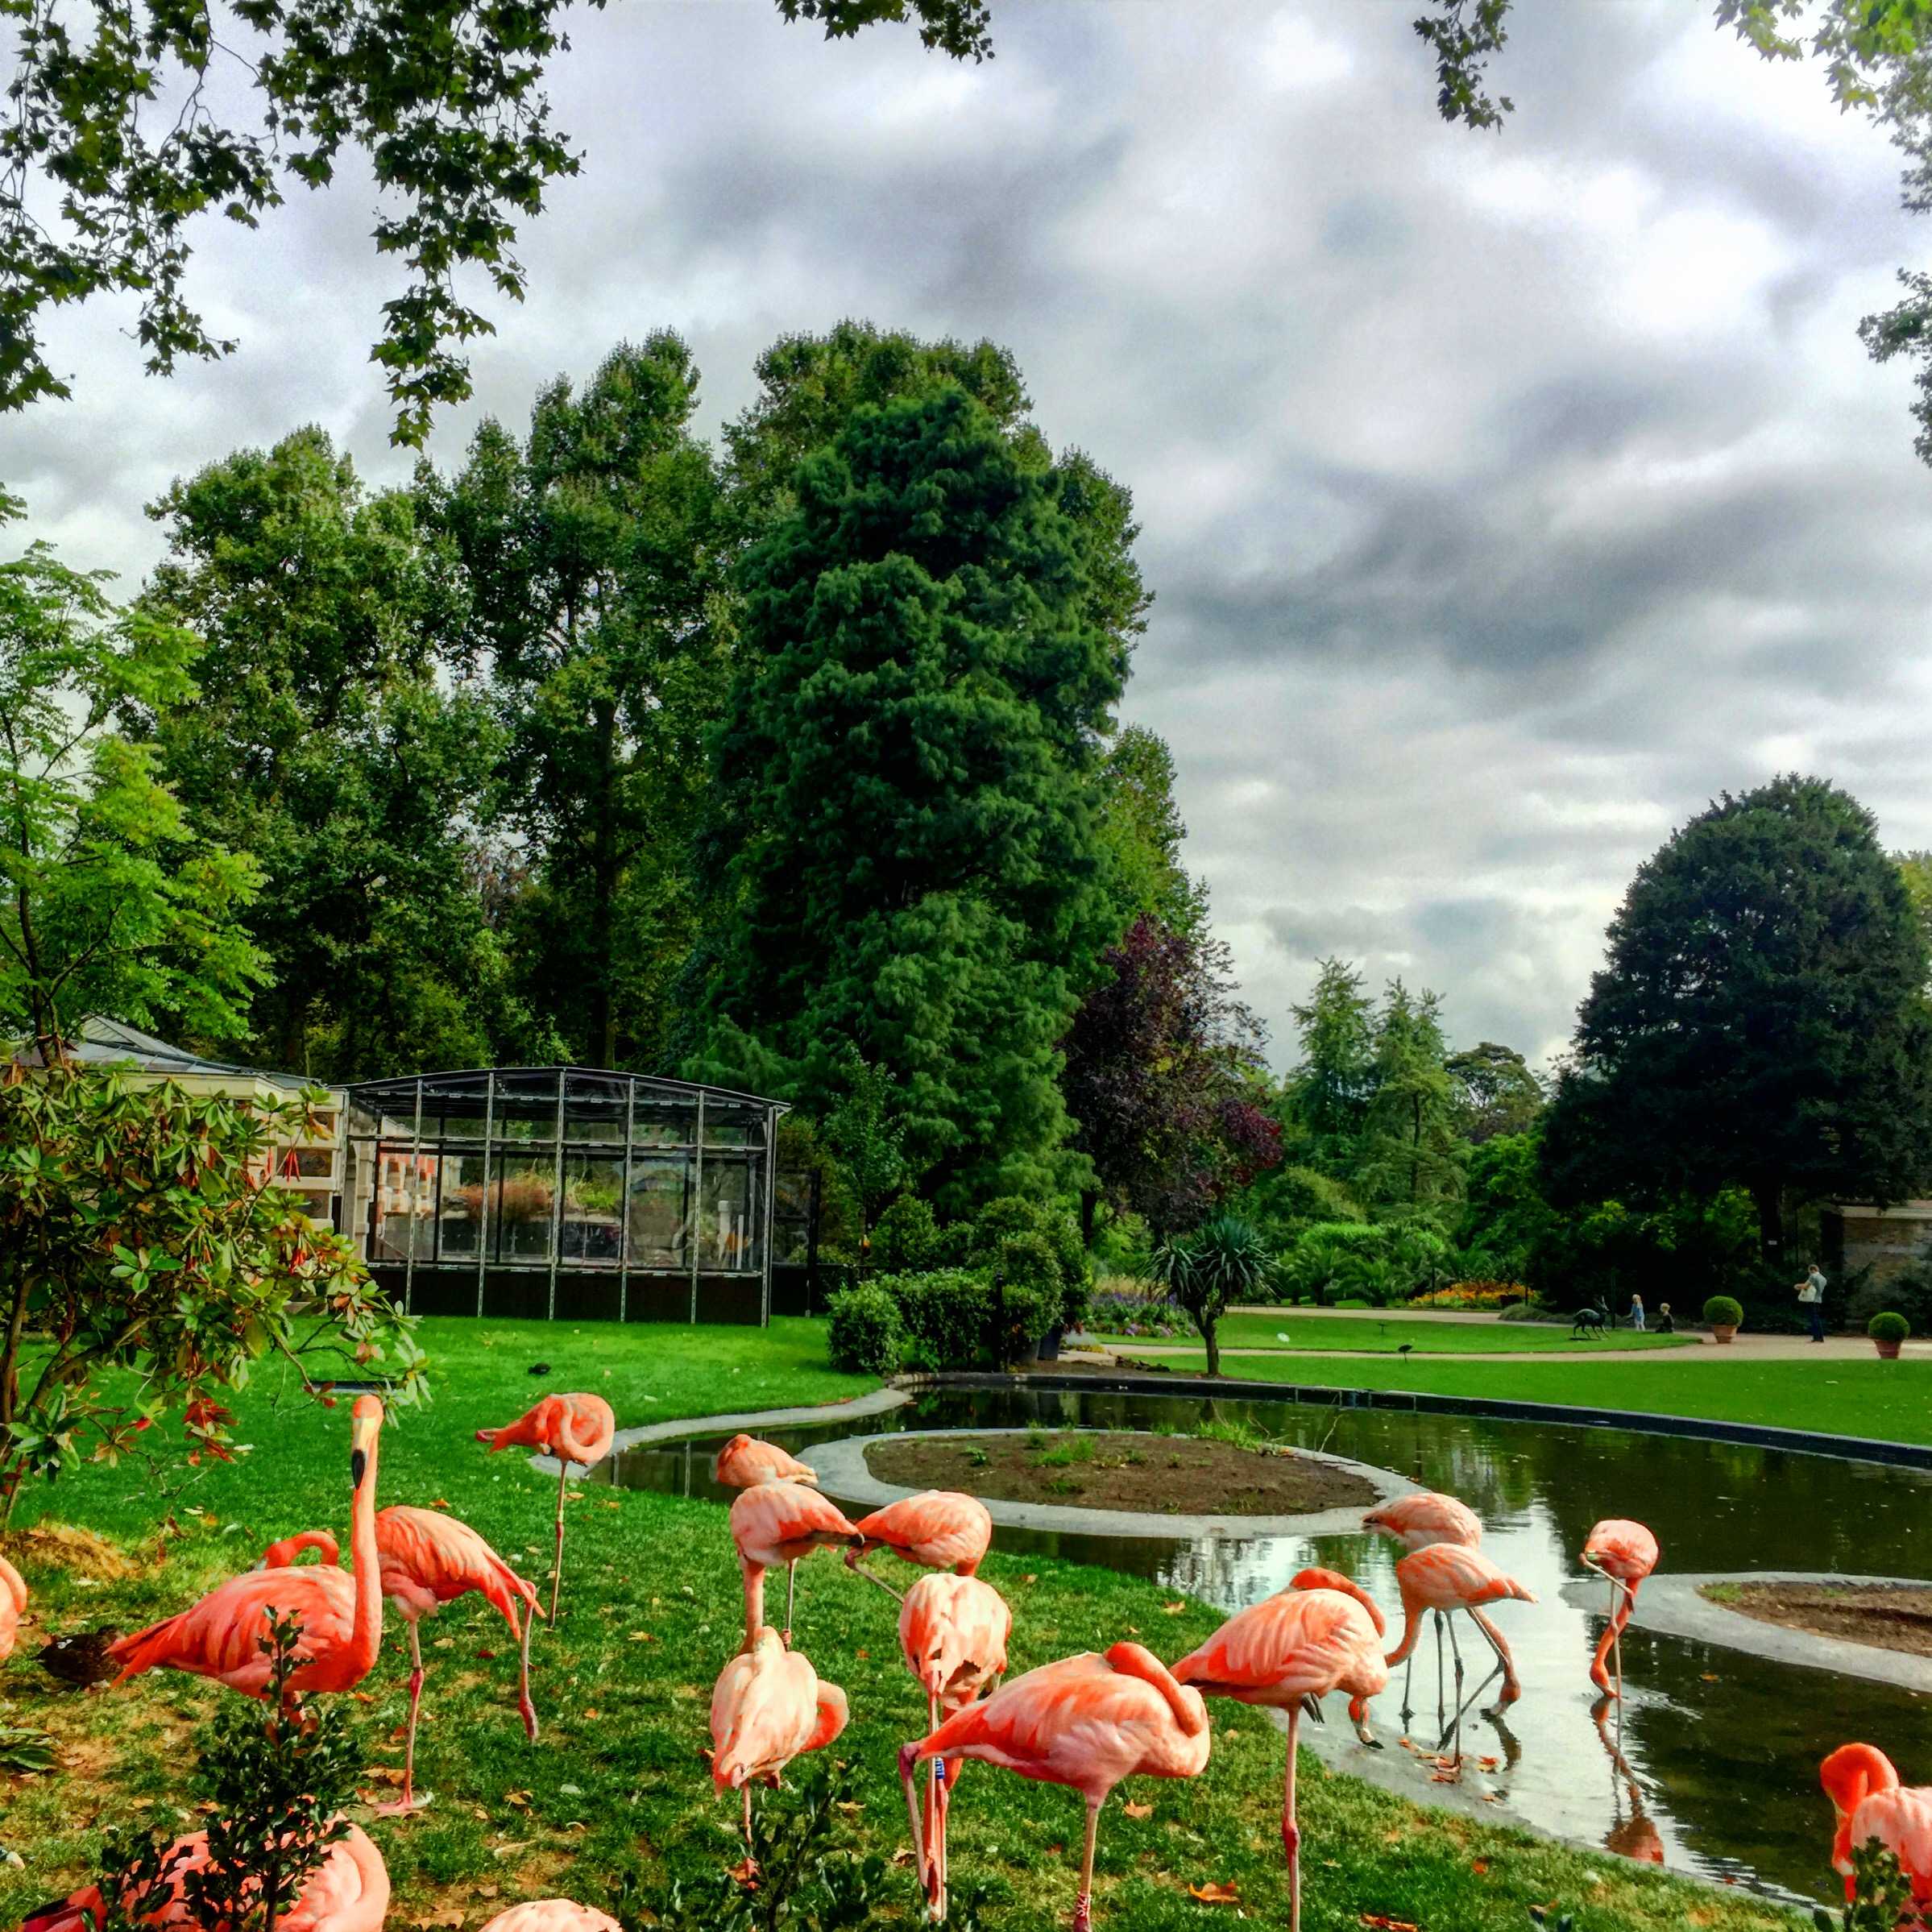 Pink flamingos in a park near a pond with canonical URL tags.